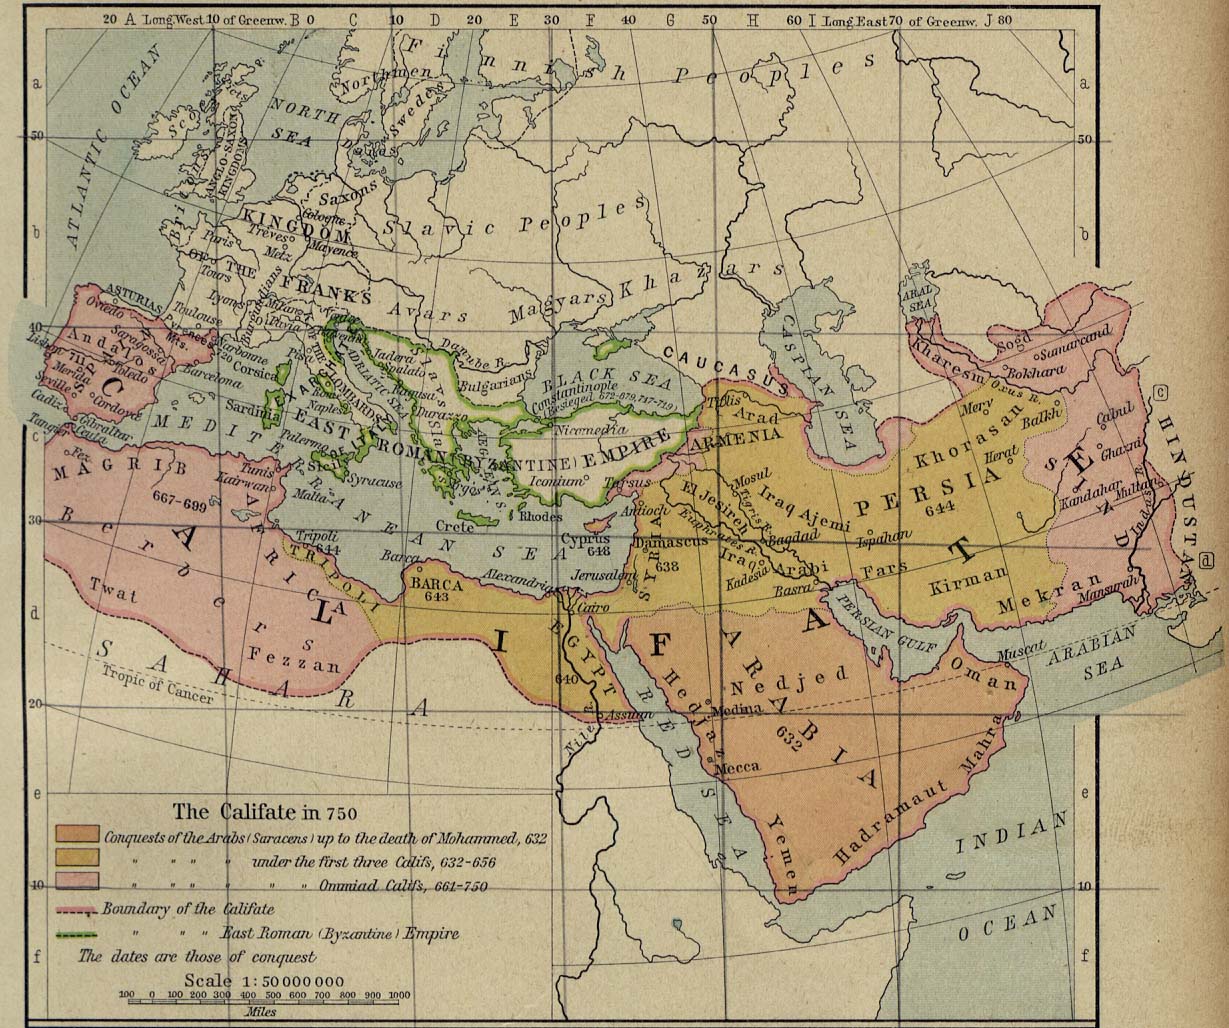 The Growth of Caliphate until 750 CE